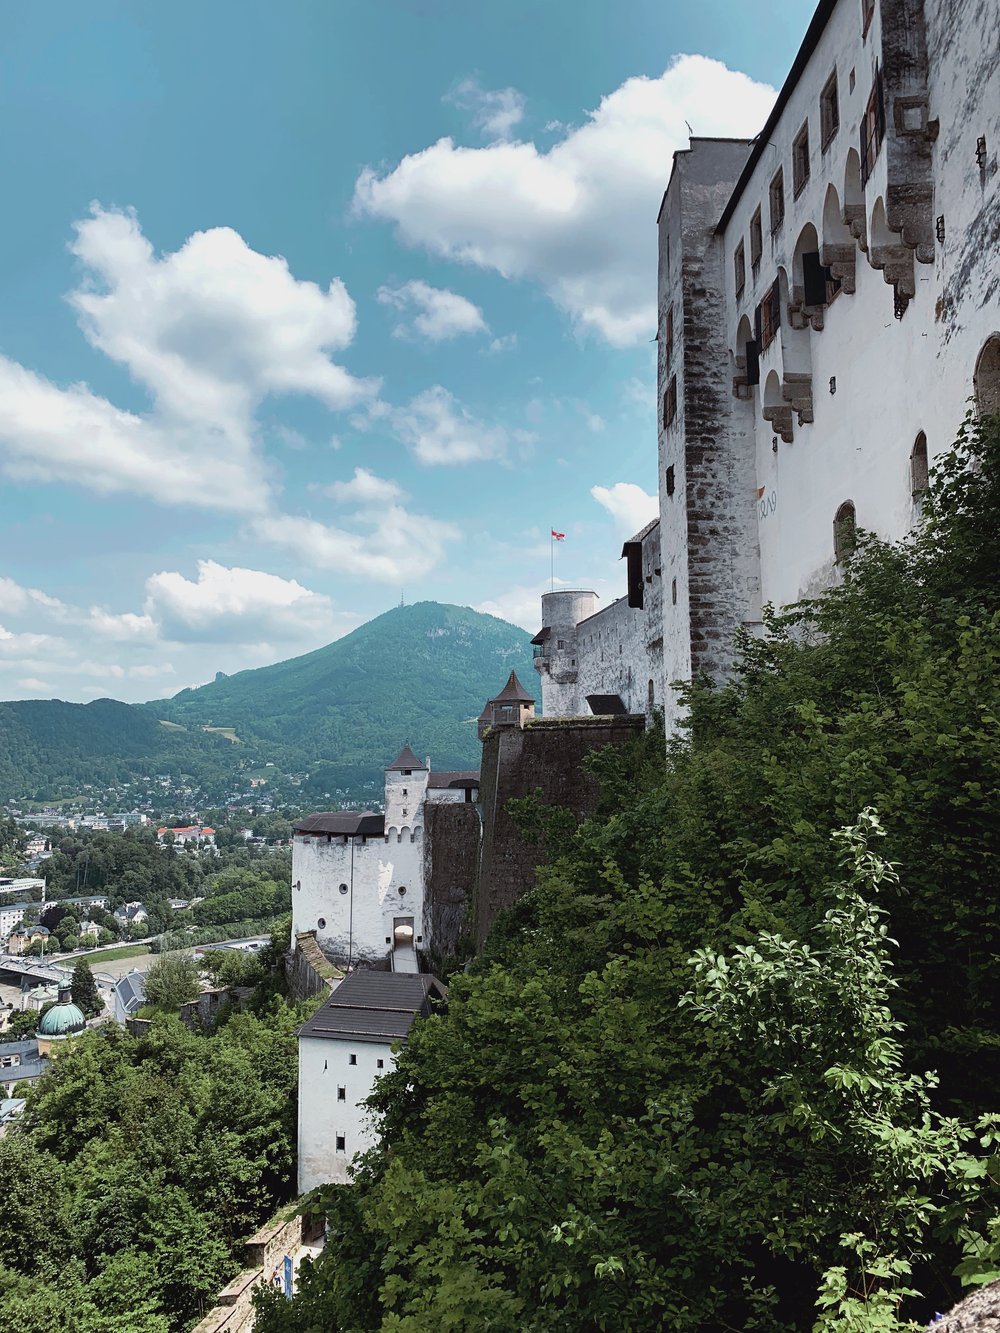 Fortress Hohensalzburg | A Day in Salzburg - Wander Wednesday with Merry + Grace